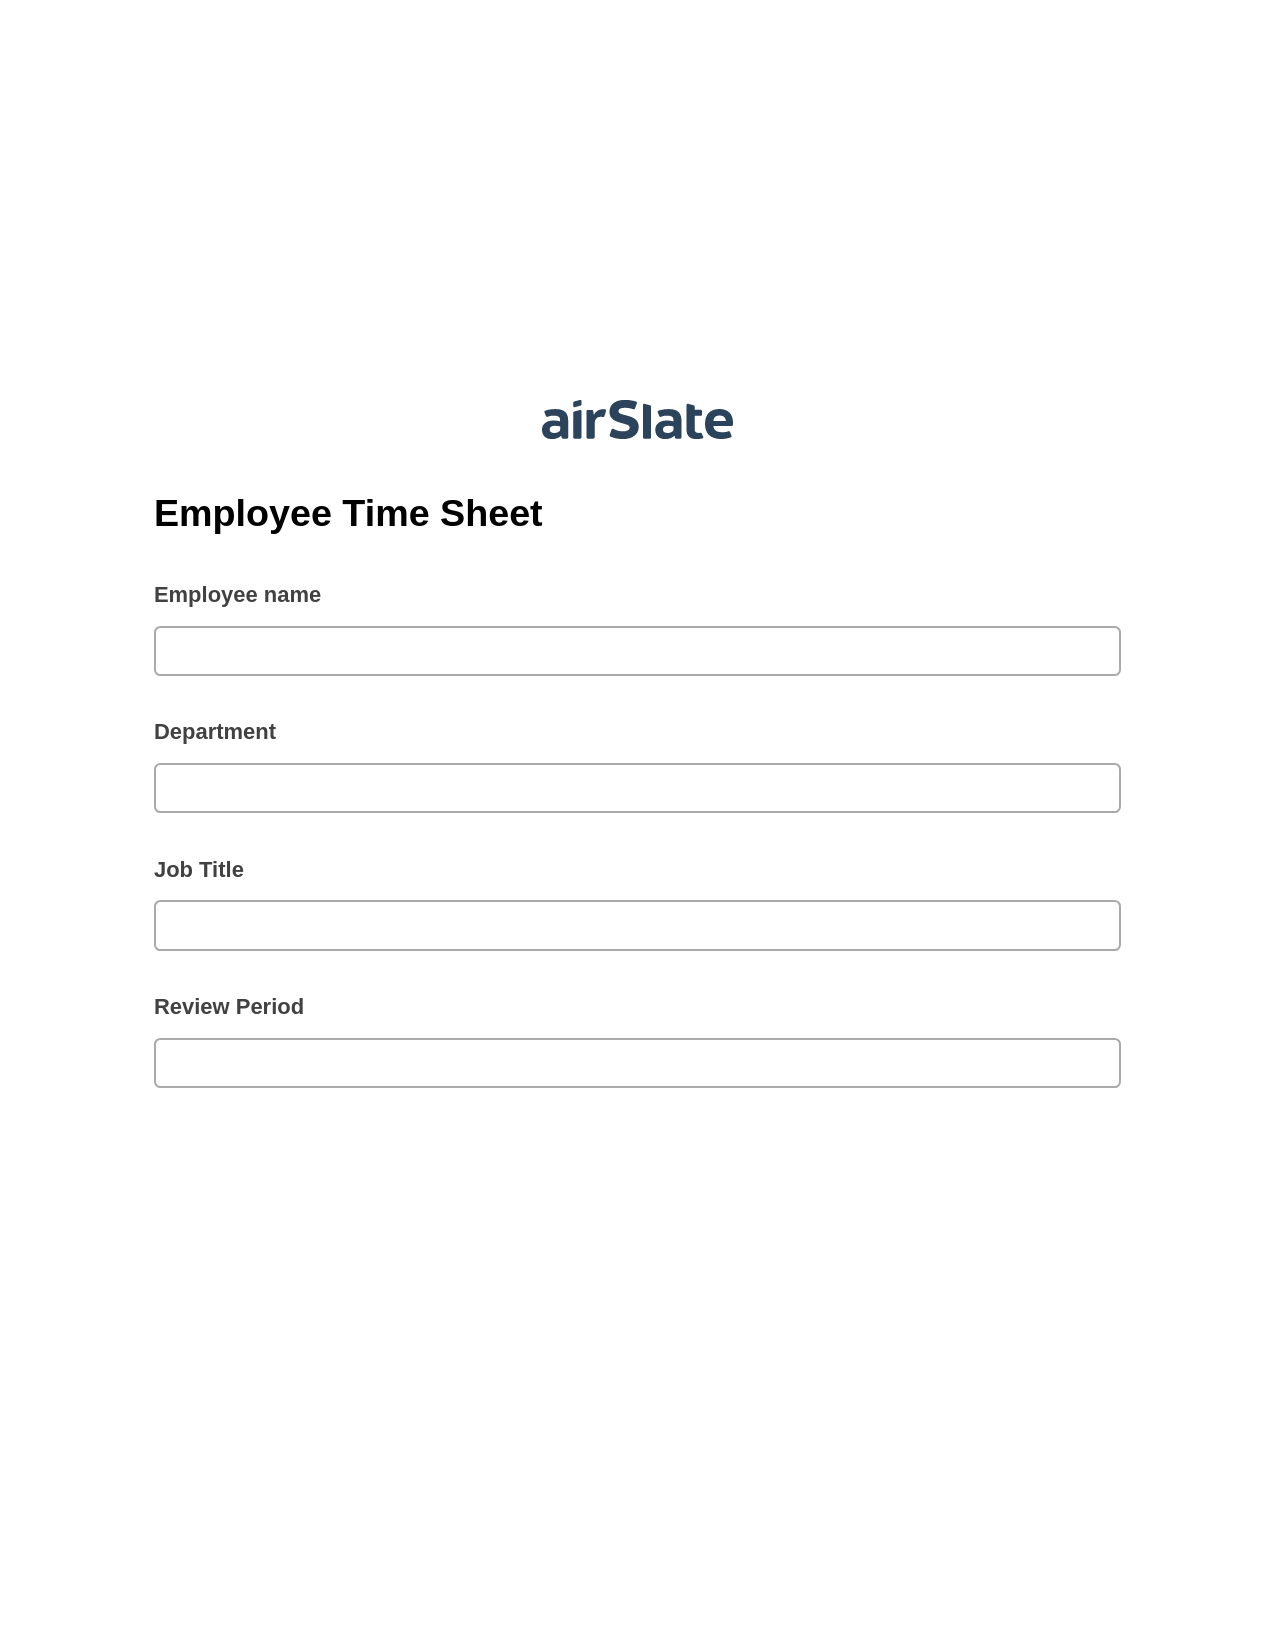 Employee Time Sheet Pre-fill from CSV File Bot, Create Salesforce Records Bot, Export to Salesforce Record Bot